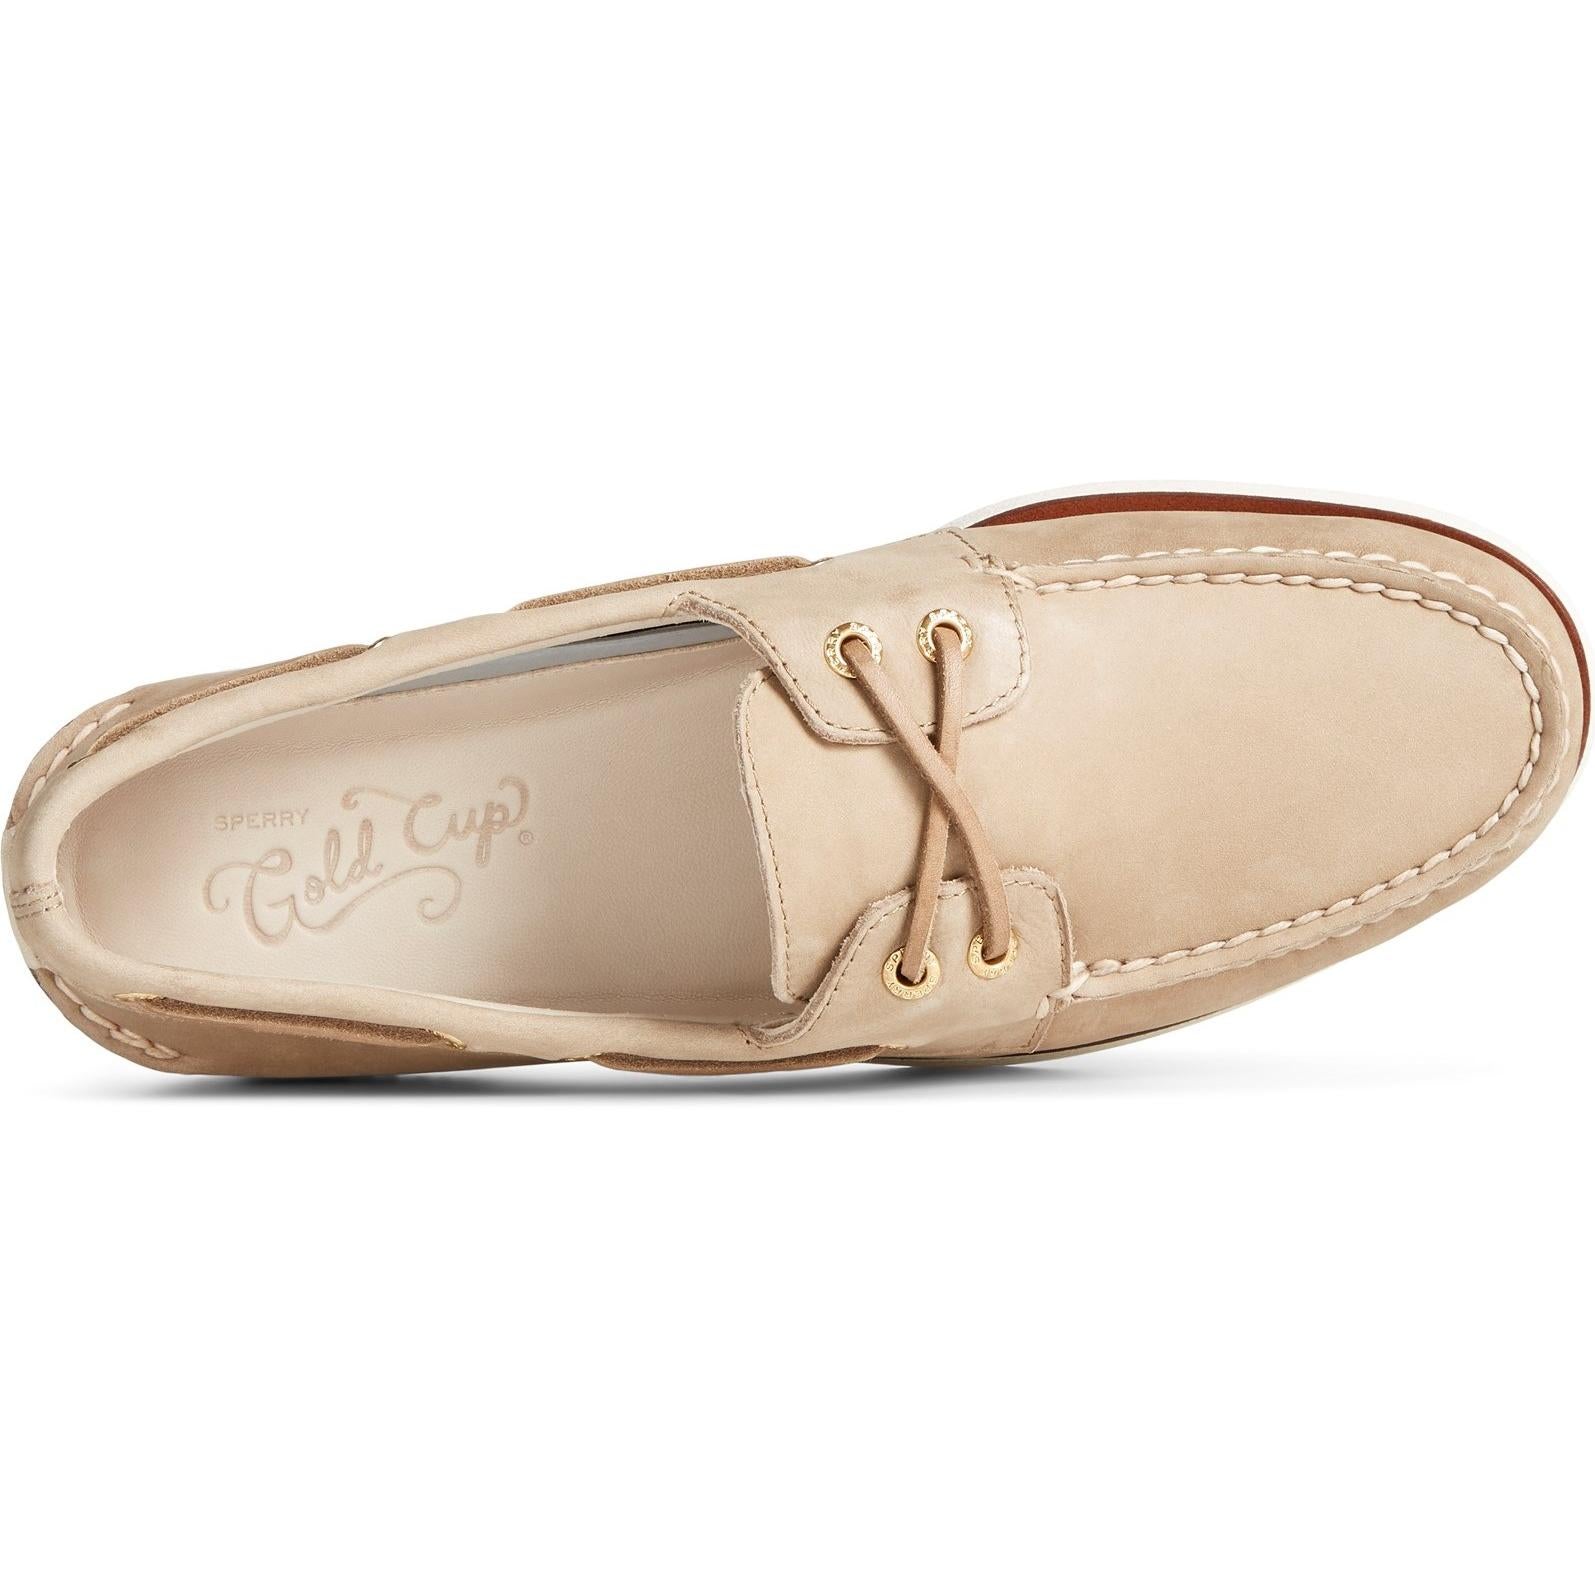 Sperry Top-sider A/O 2-EYE Boat shoe